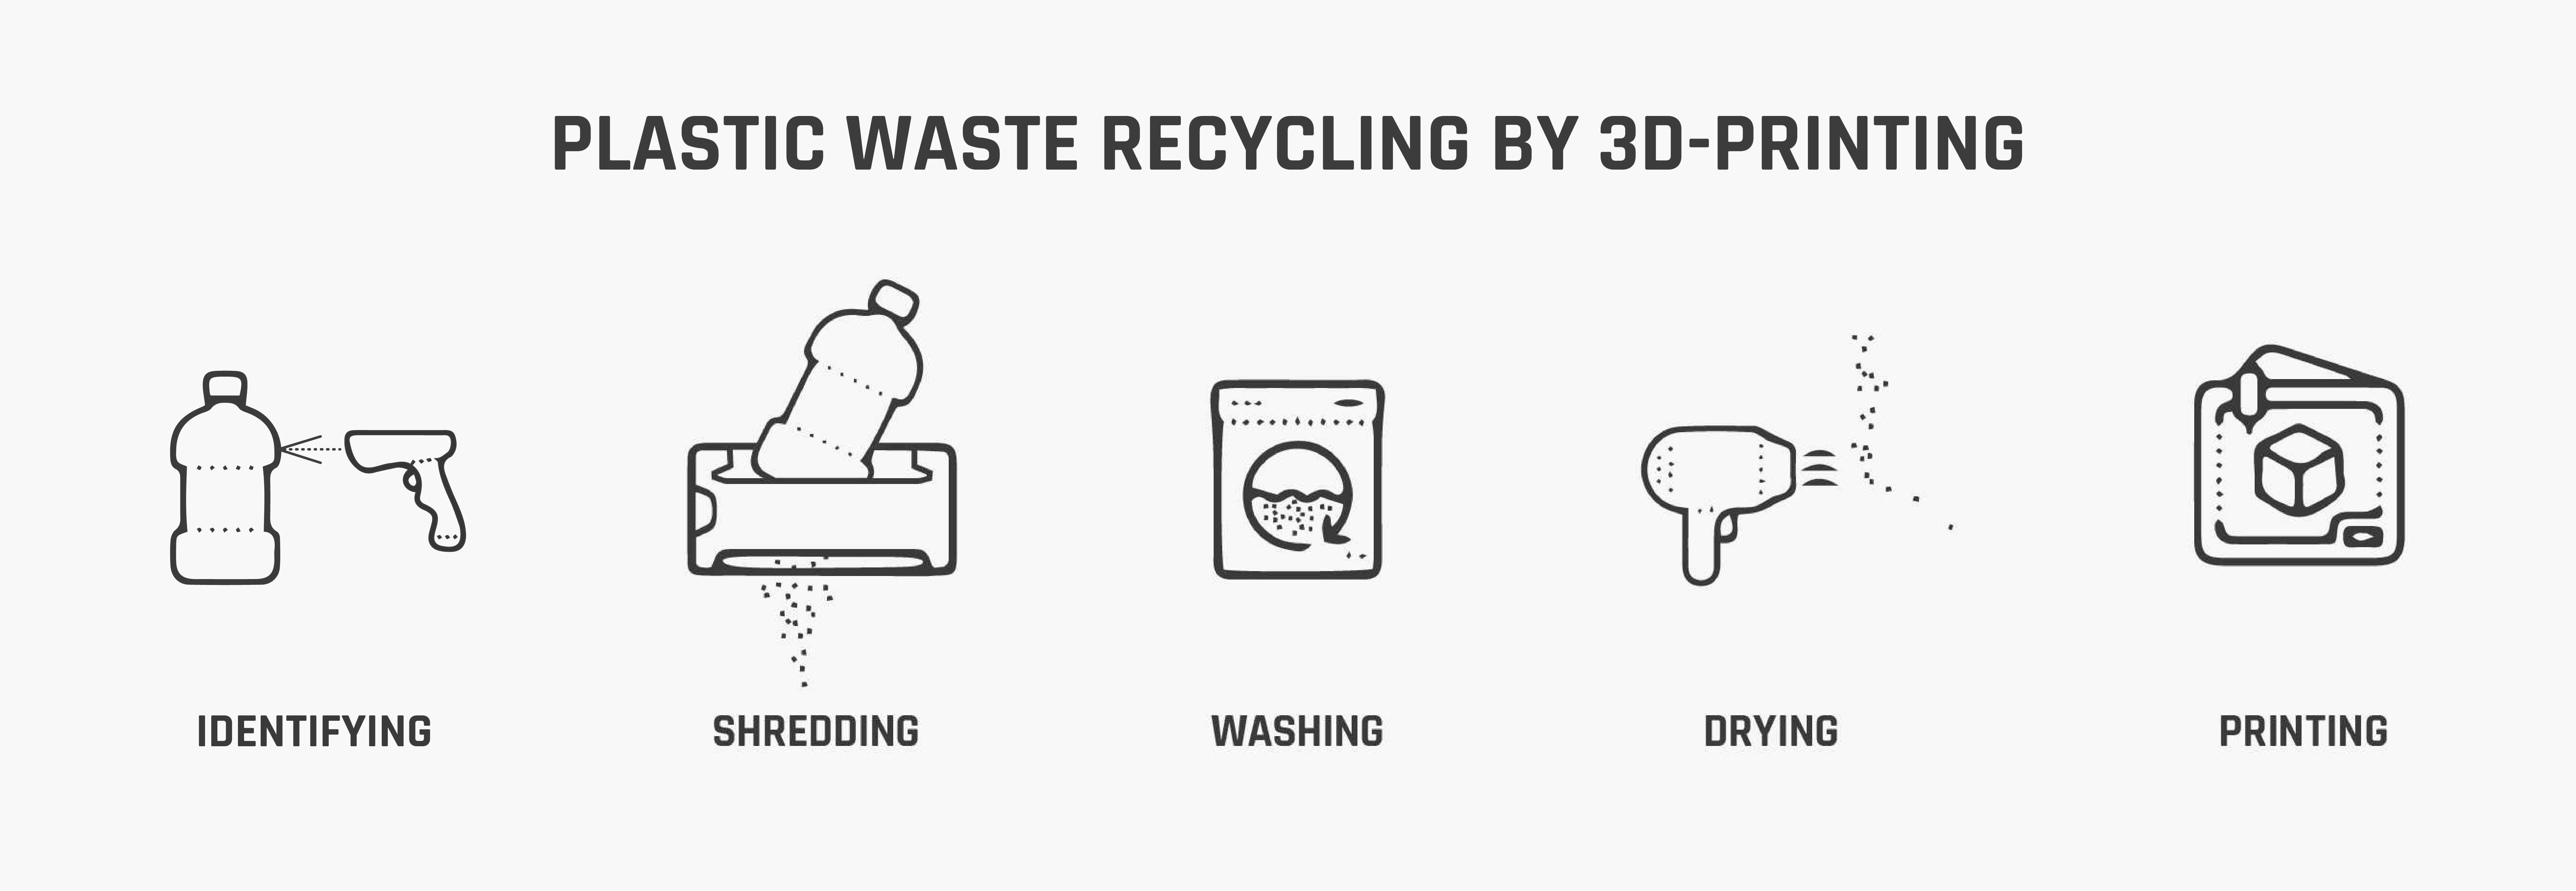 plastic recycling process steps